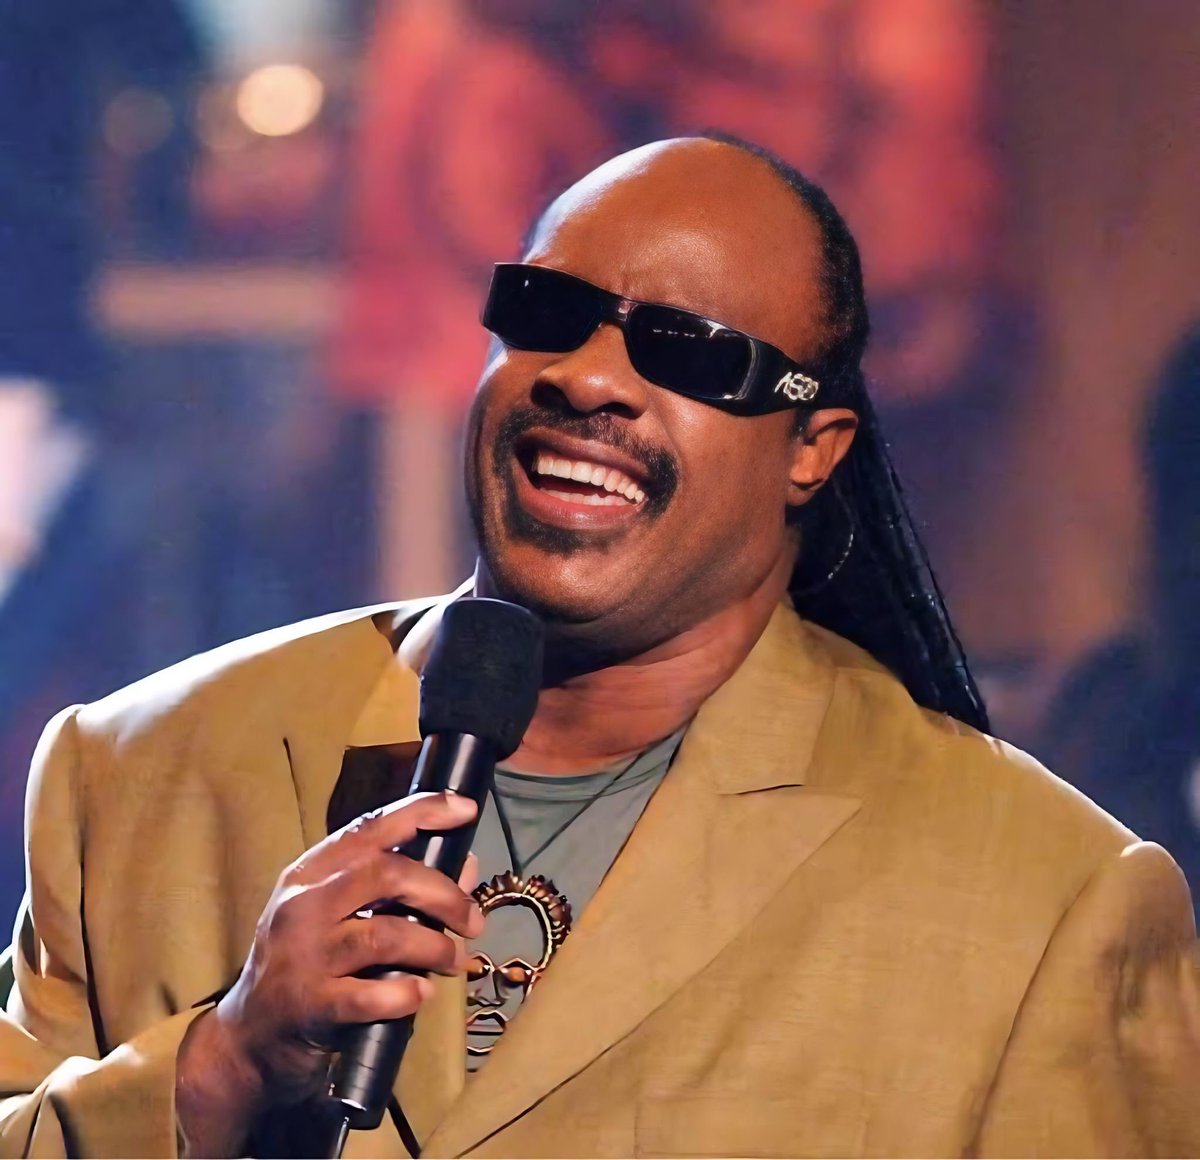 Happy 74th birthday to musician, singer, songwriter, producer, multi-instrumentalist, icon and Legend, Stevie Wonder!